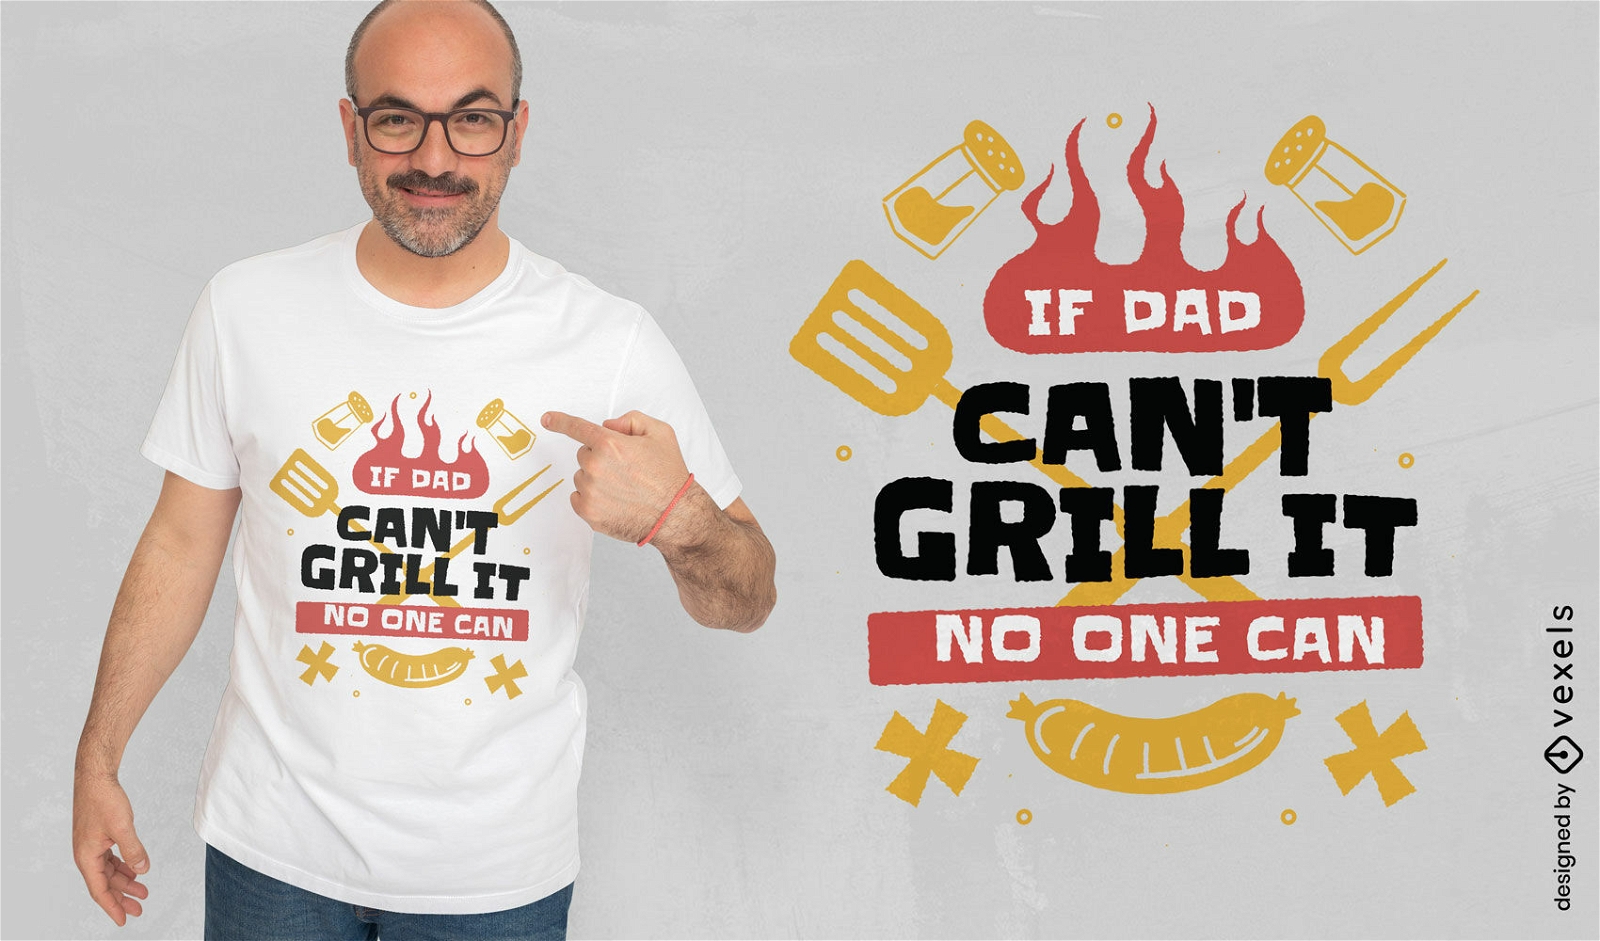 If dad can't grill it quote t-shirt design